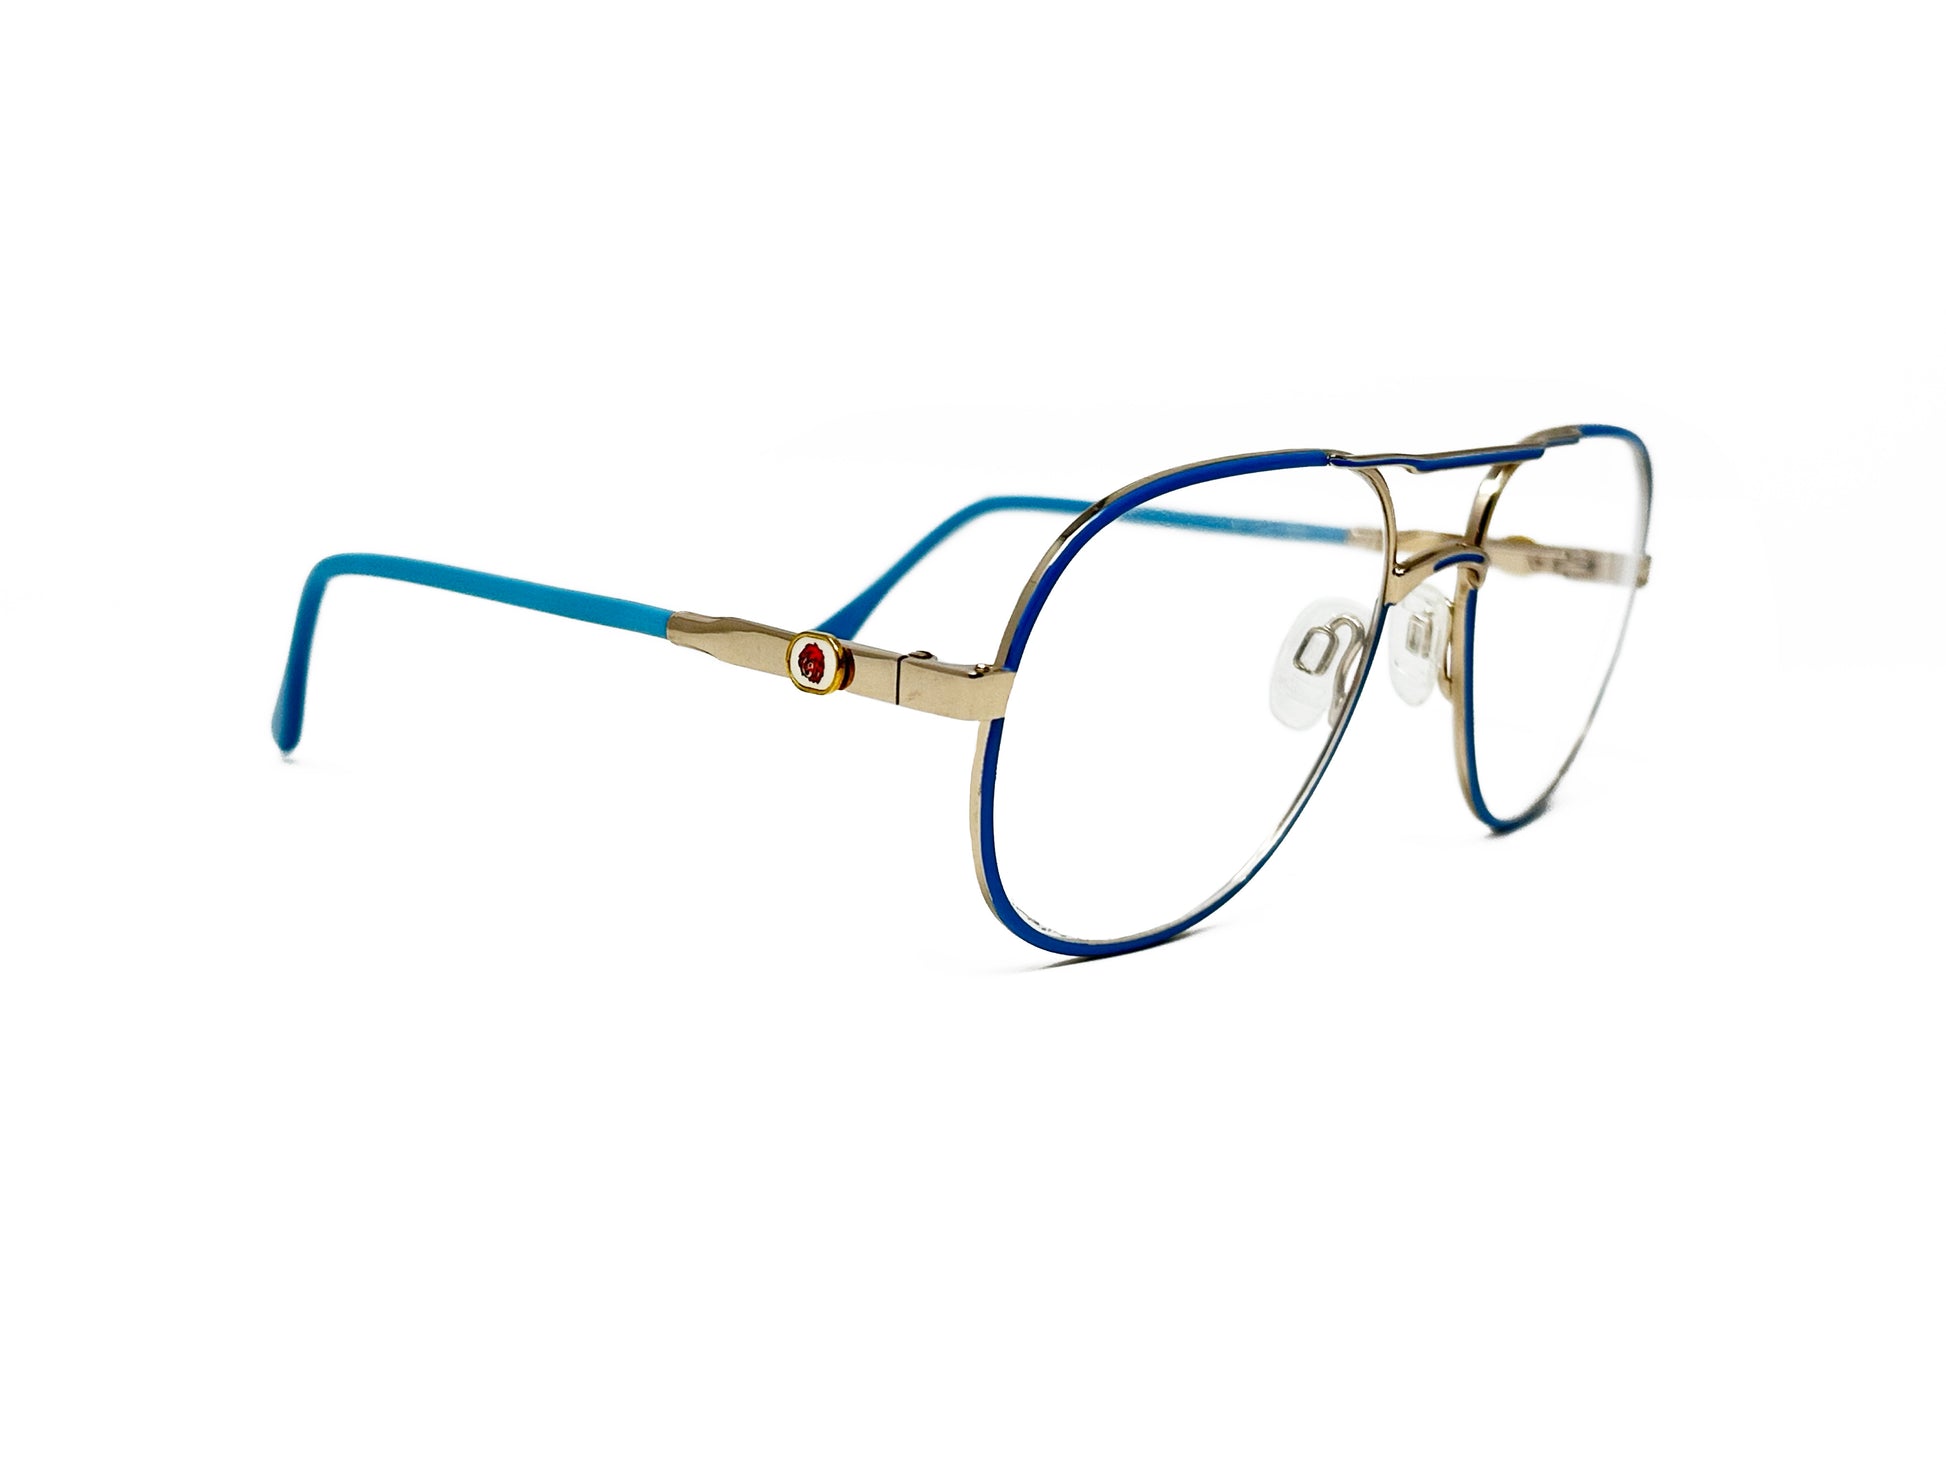 Zollitsch rounded aviator style optical frame. Model: Margit. Color: Dieterle - Sea blue with golden accents on bridge and temple. Side view.